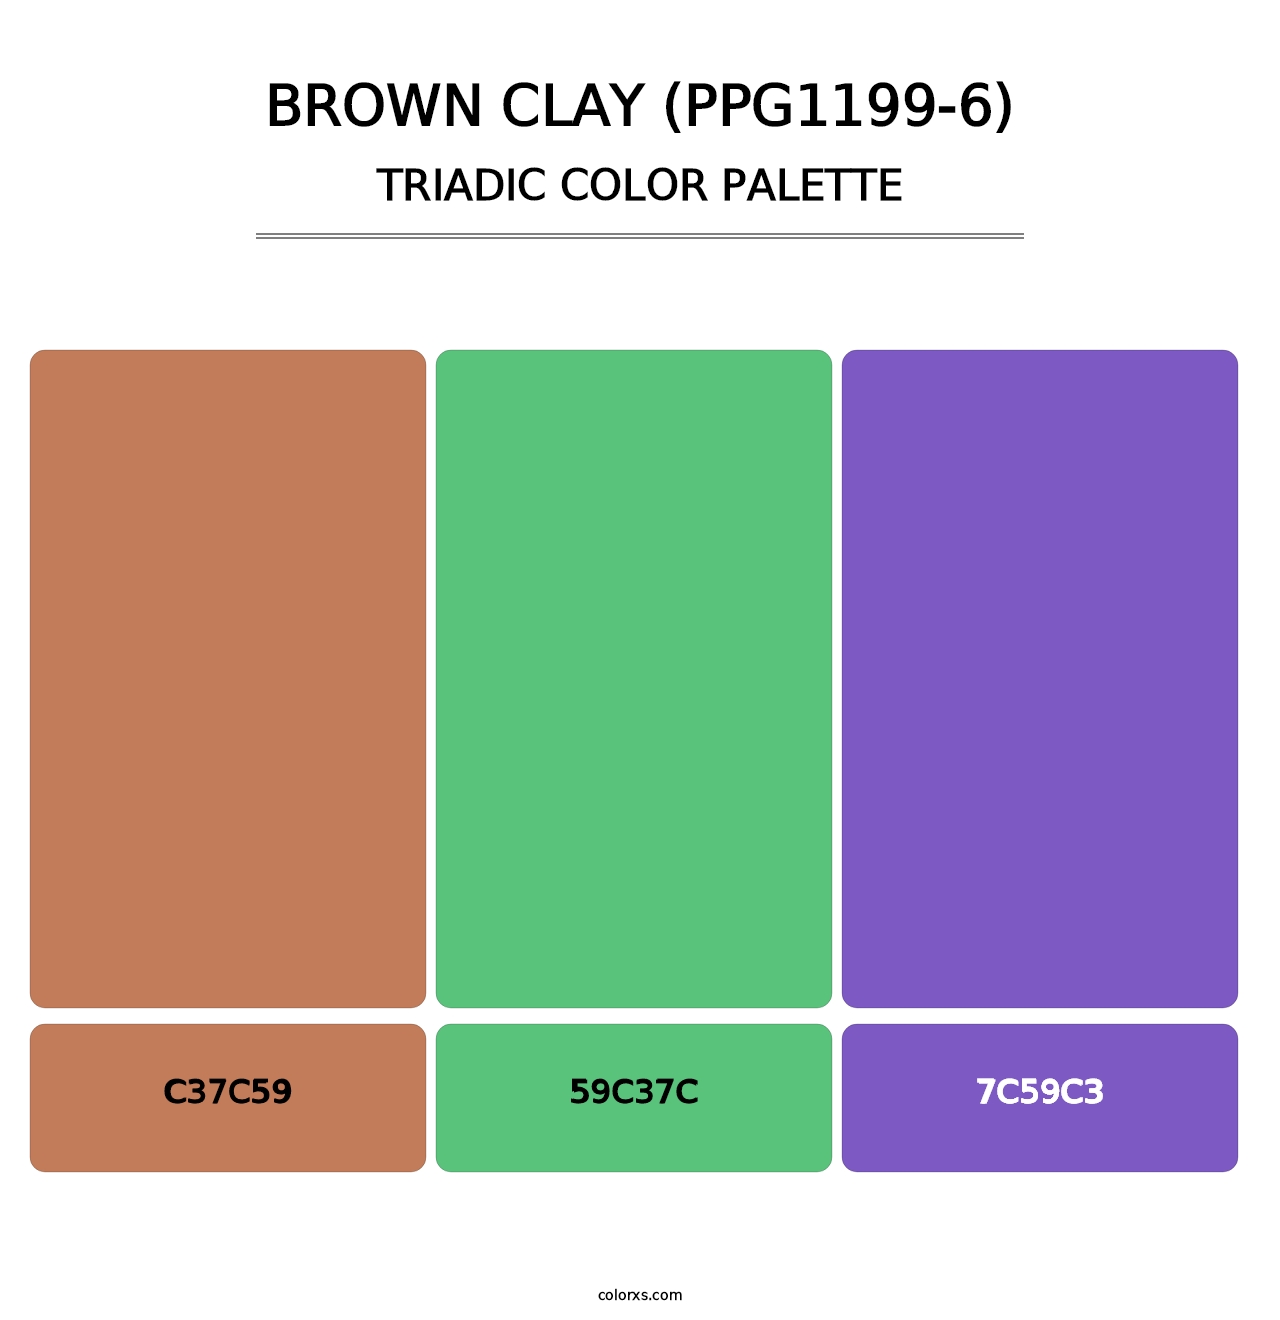 Brown Clay (PPG1199-6) - Triadic Color Palette